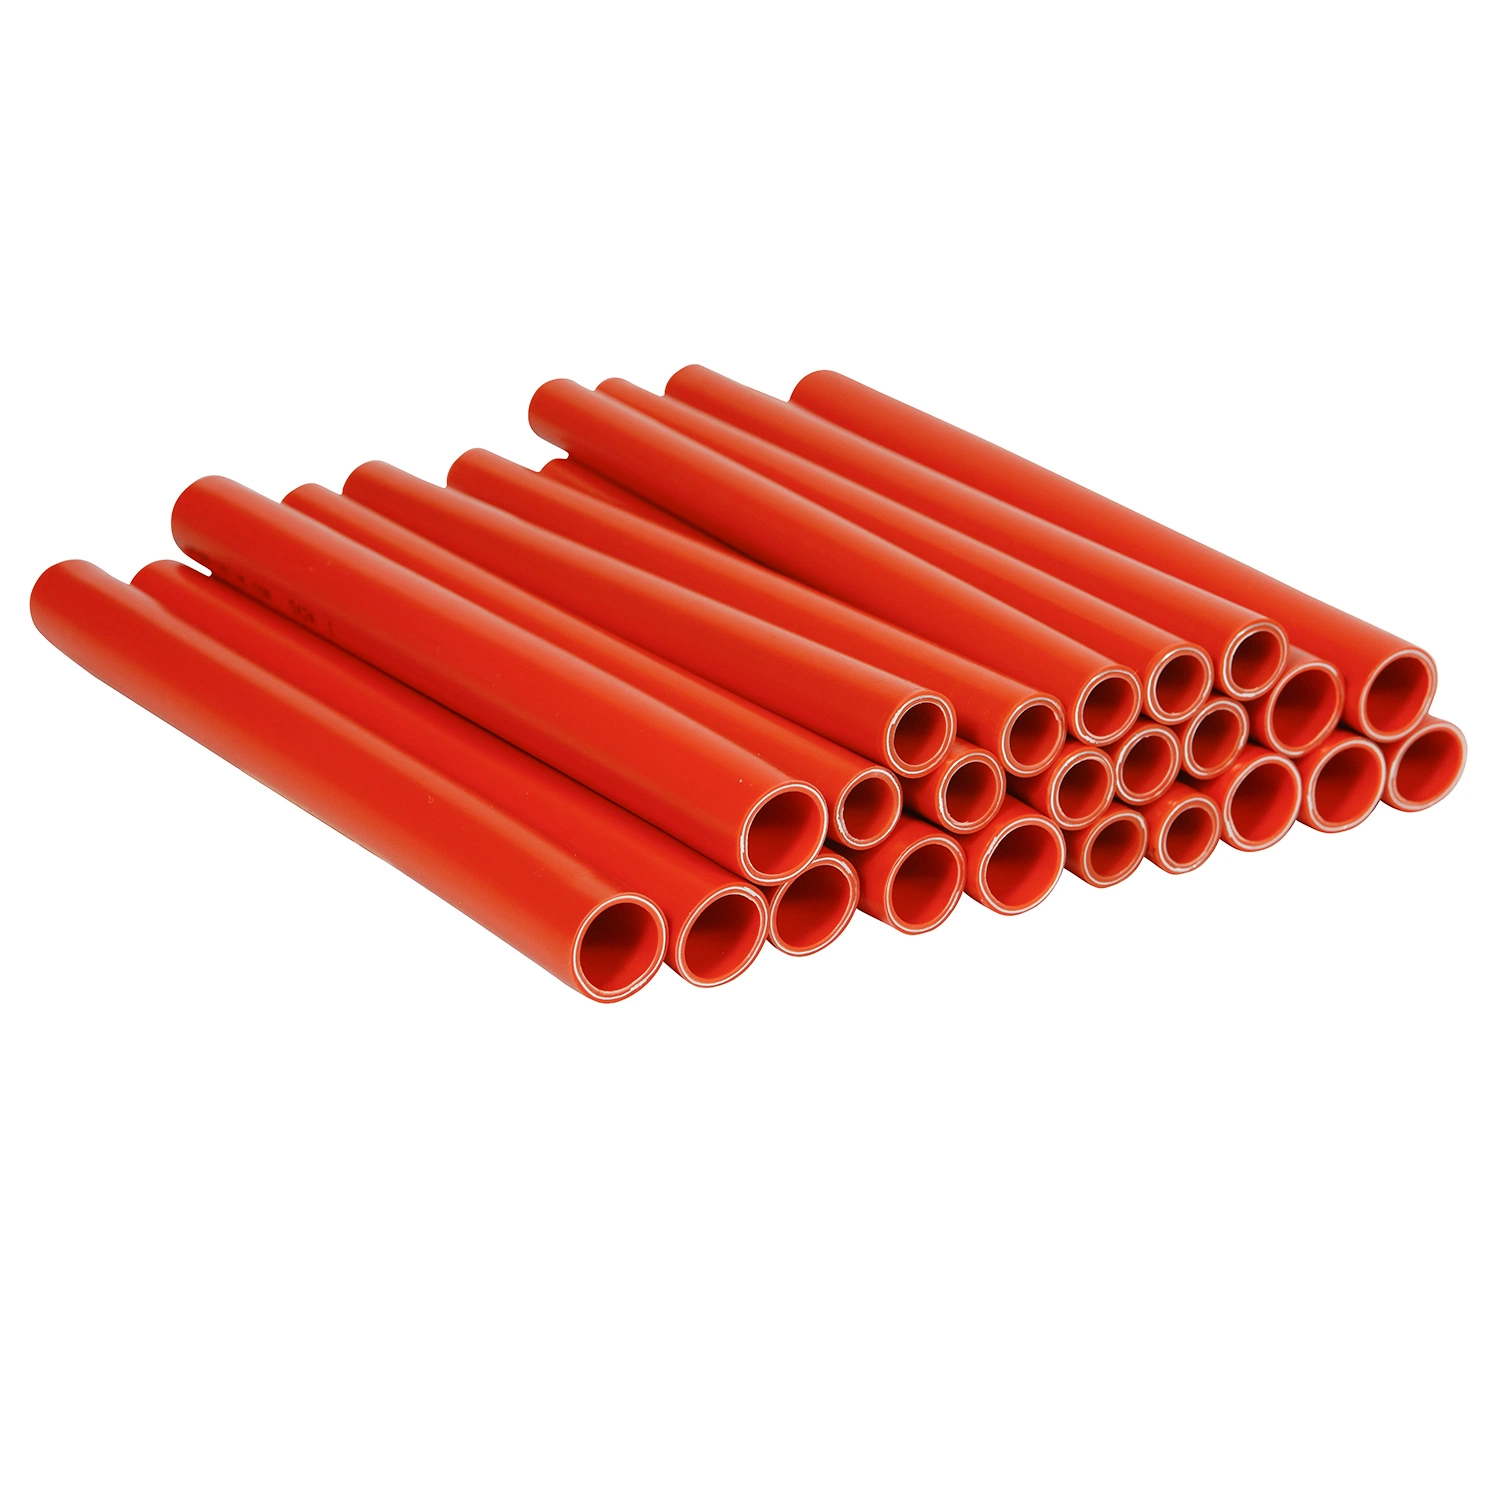 PEX-AL-PEX multilayer composite pipe for water and gas with Germany quality